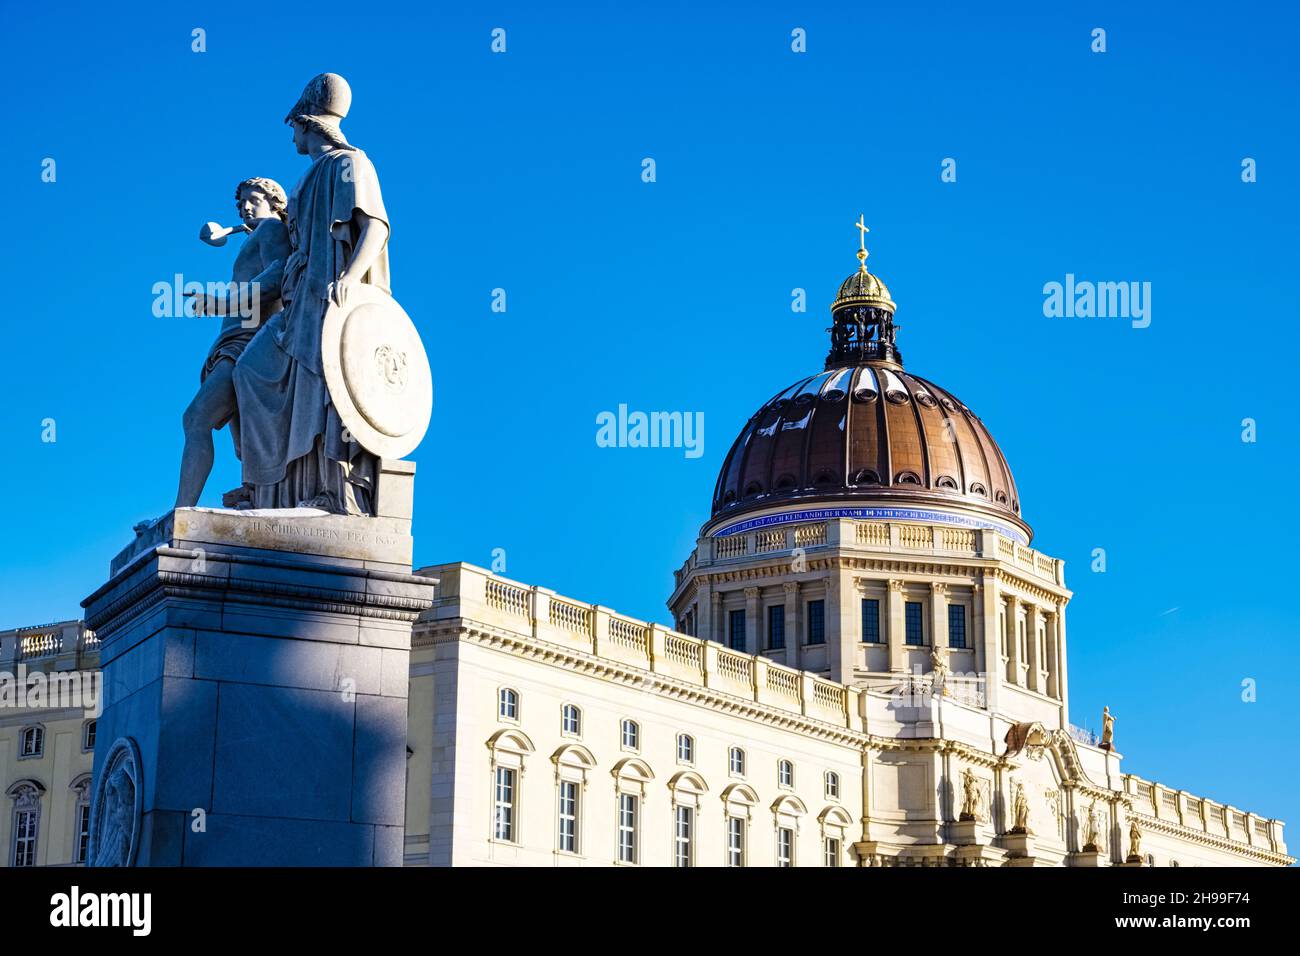 Sculptures in front of Berlin Palace, Berlin, Germany Stock Photo